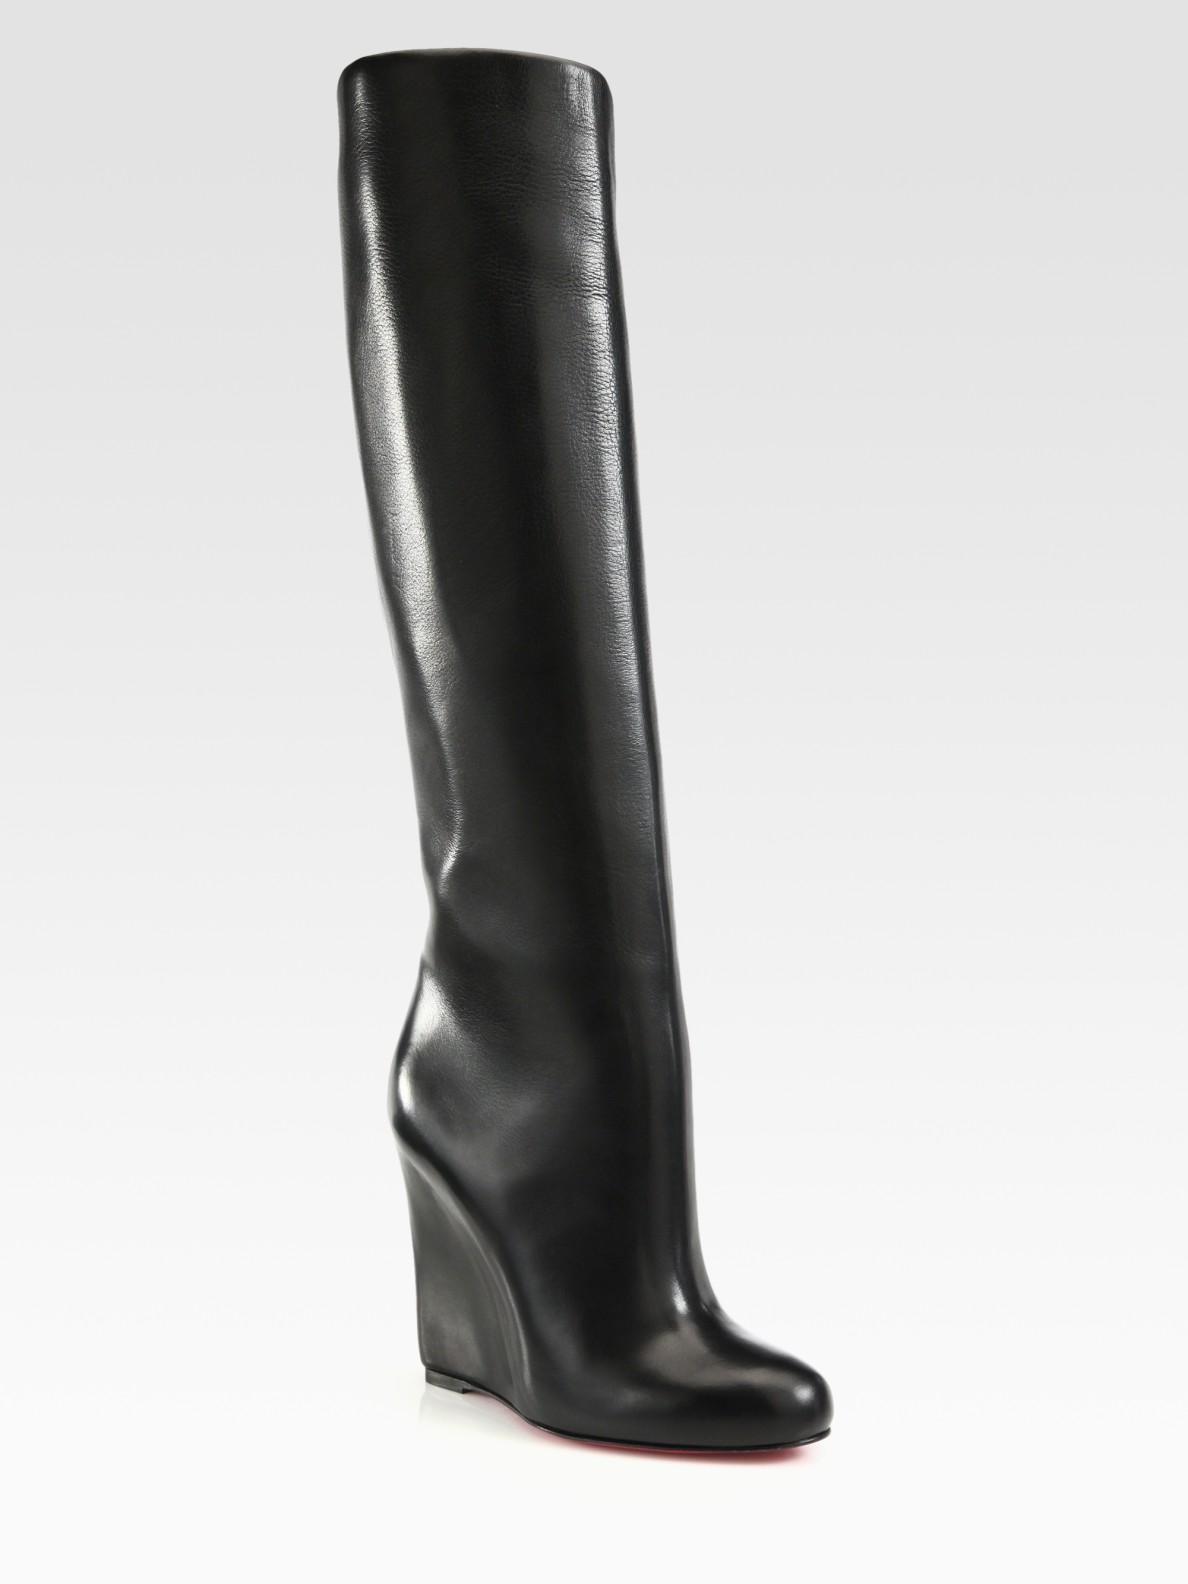 christian louboutin wedge boots